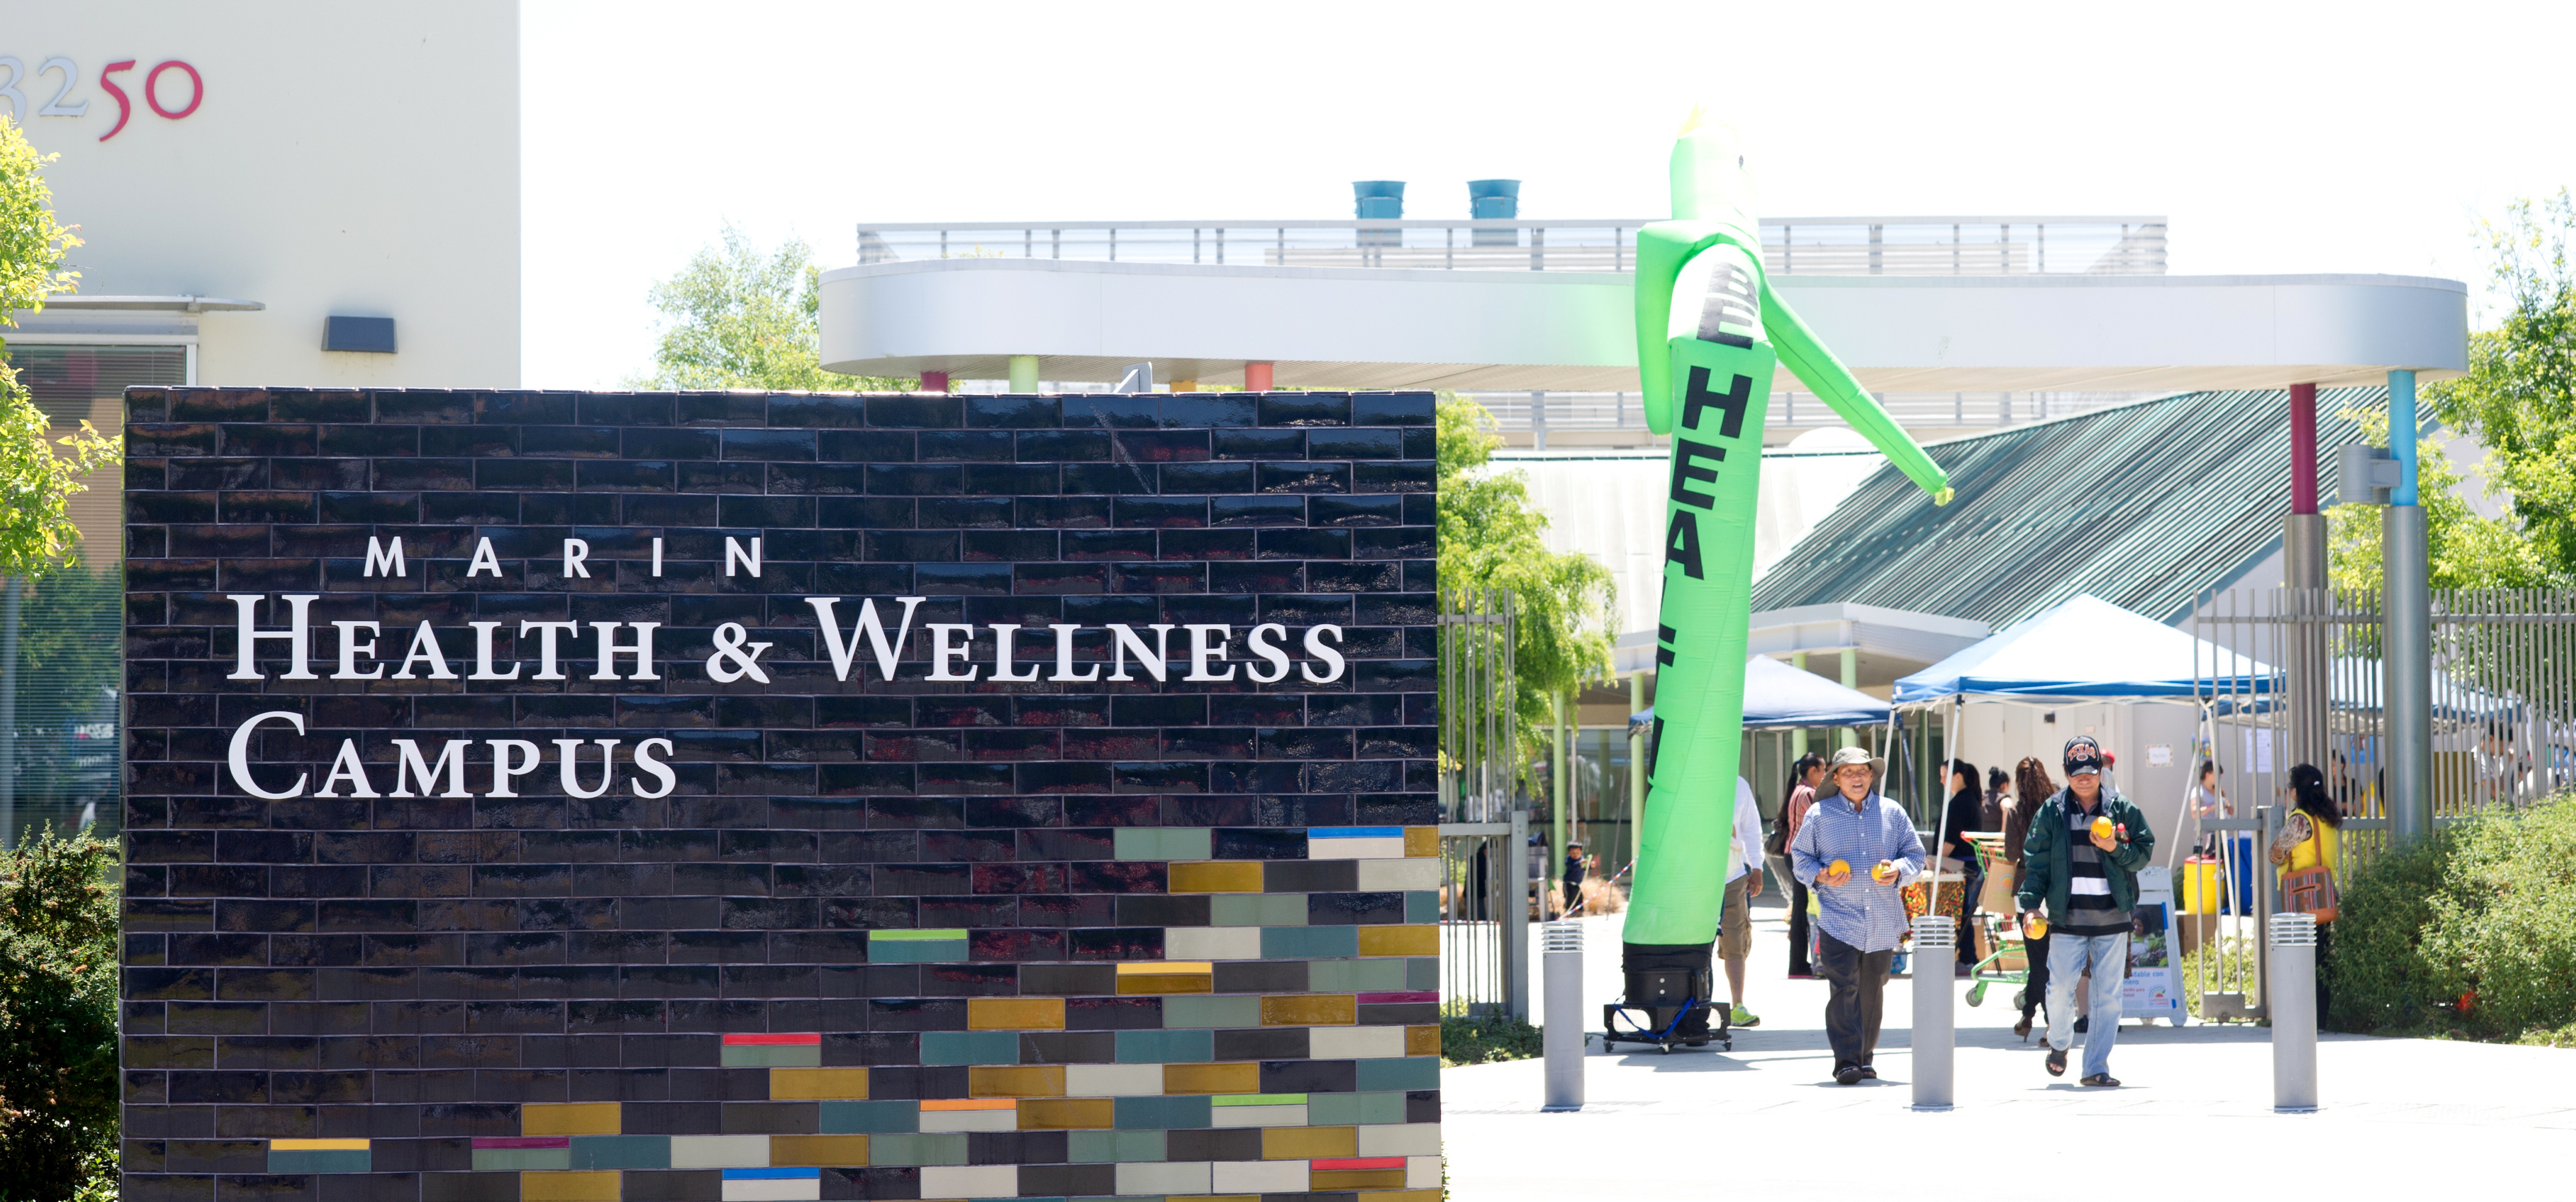 People walk past the large sign saying Marin County Health and Wellness Campus during the Fruit and Veggie Festival.